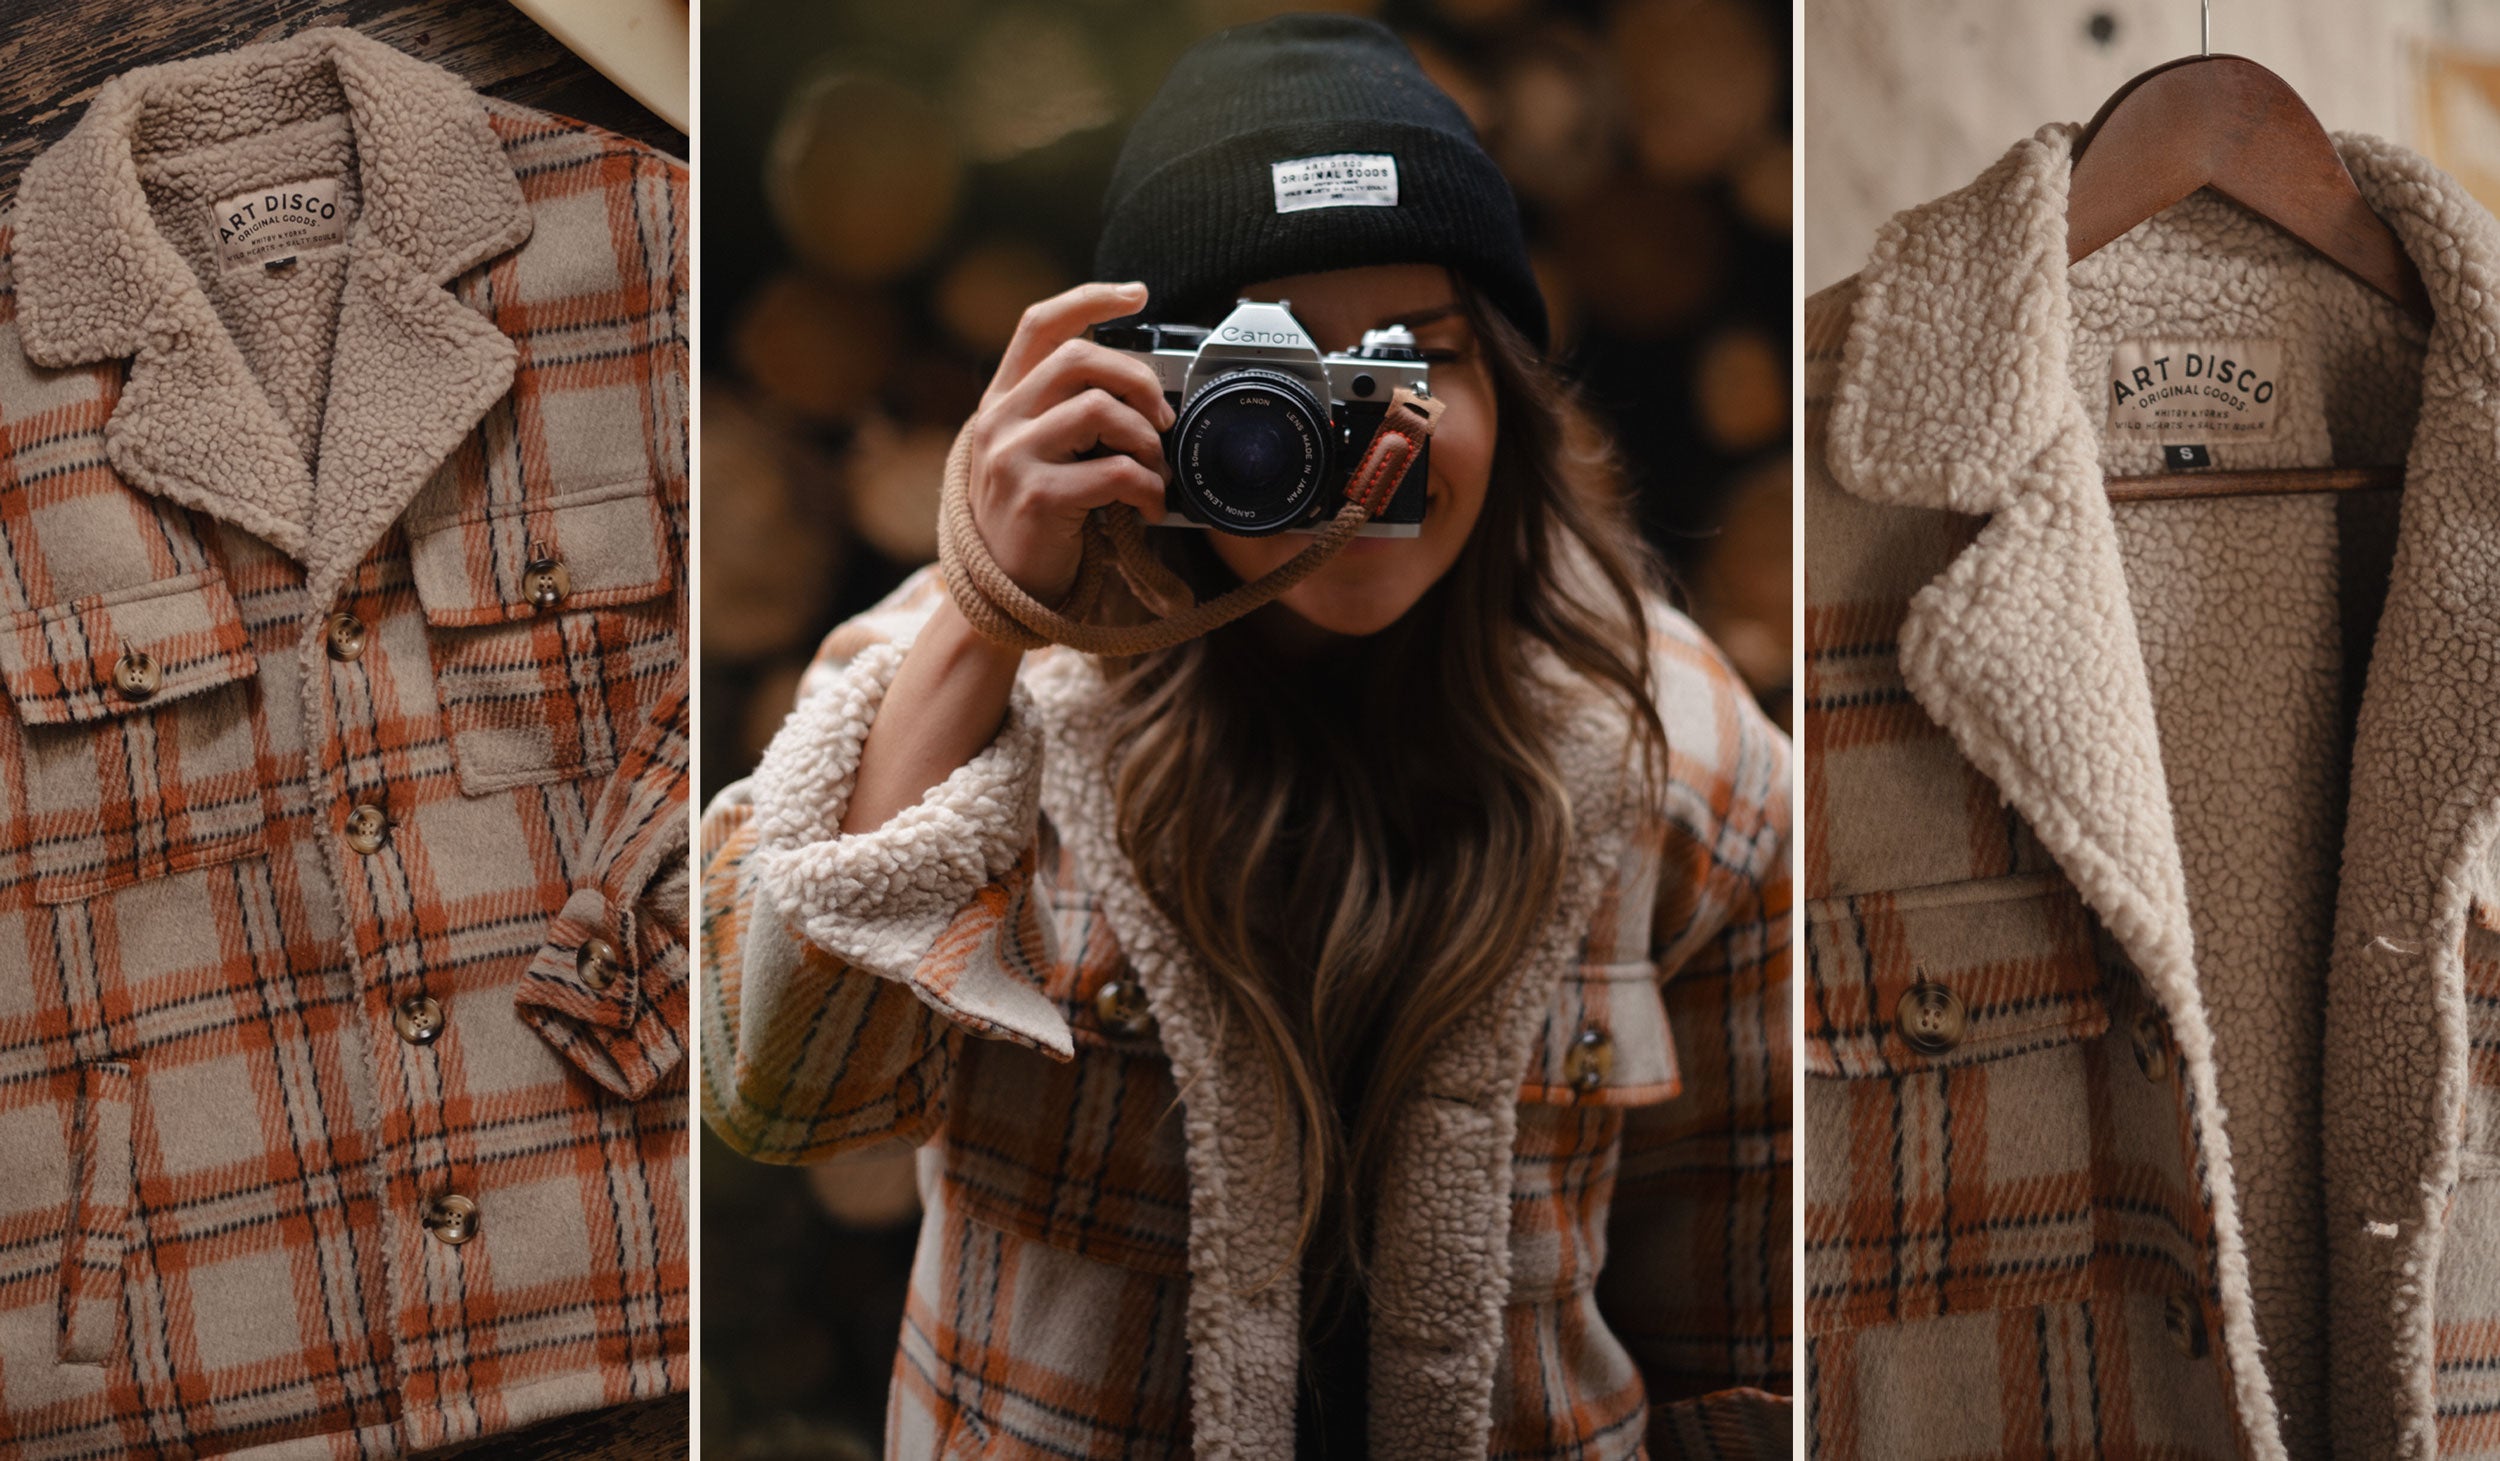 Introducing the 'Frontier' Plaid Sherpa Jacket by Art Disco